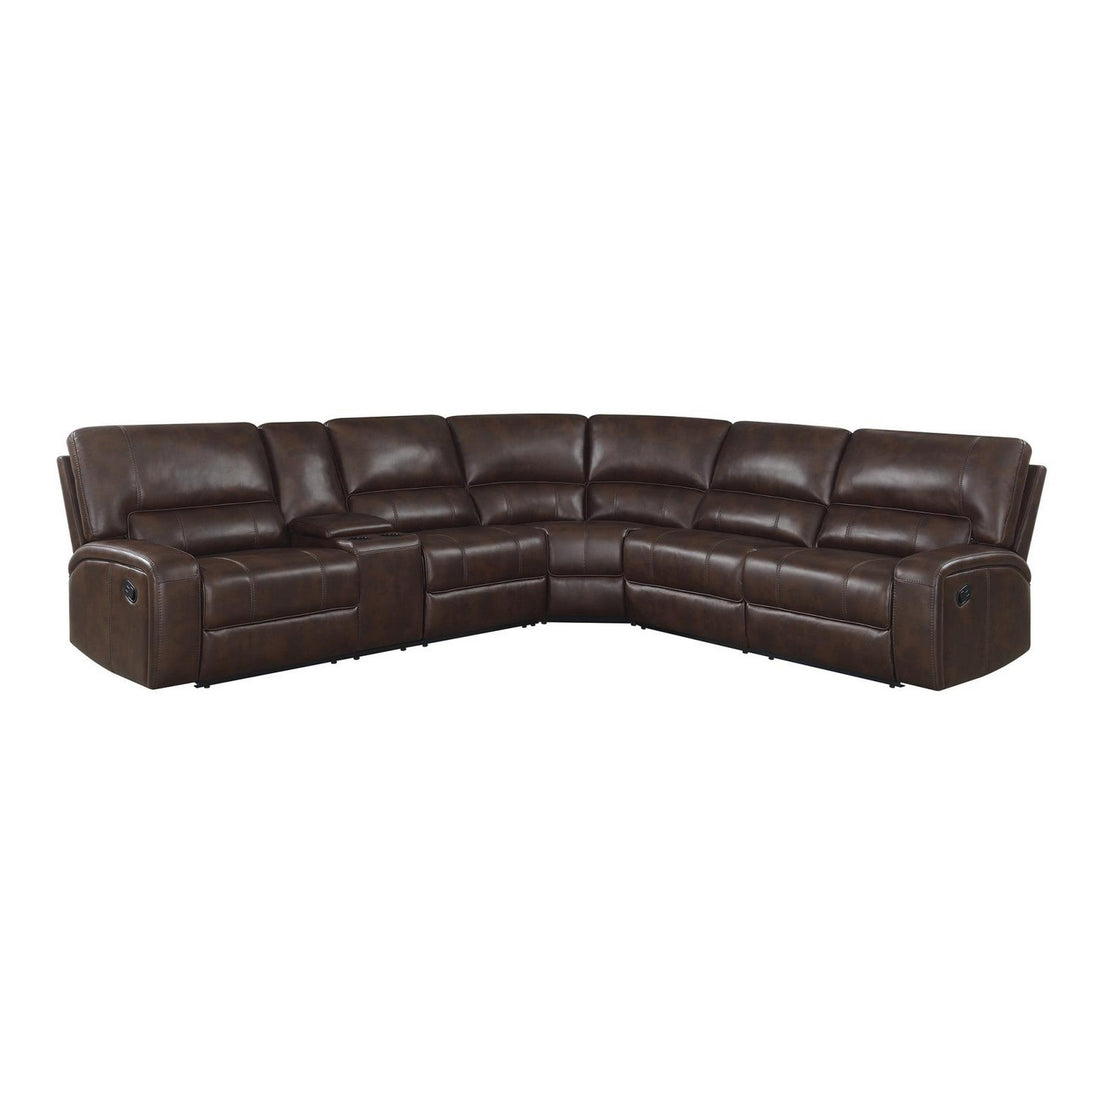 Brunson 3-piece Upholstered Motion Sectional Brown 600440